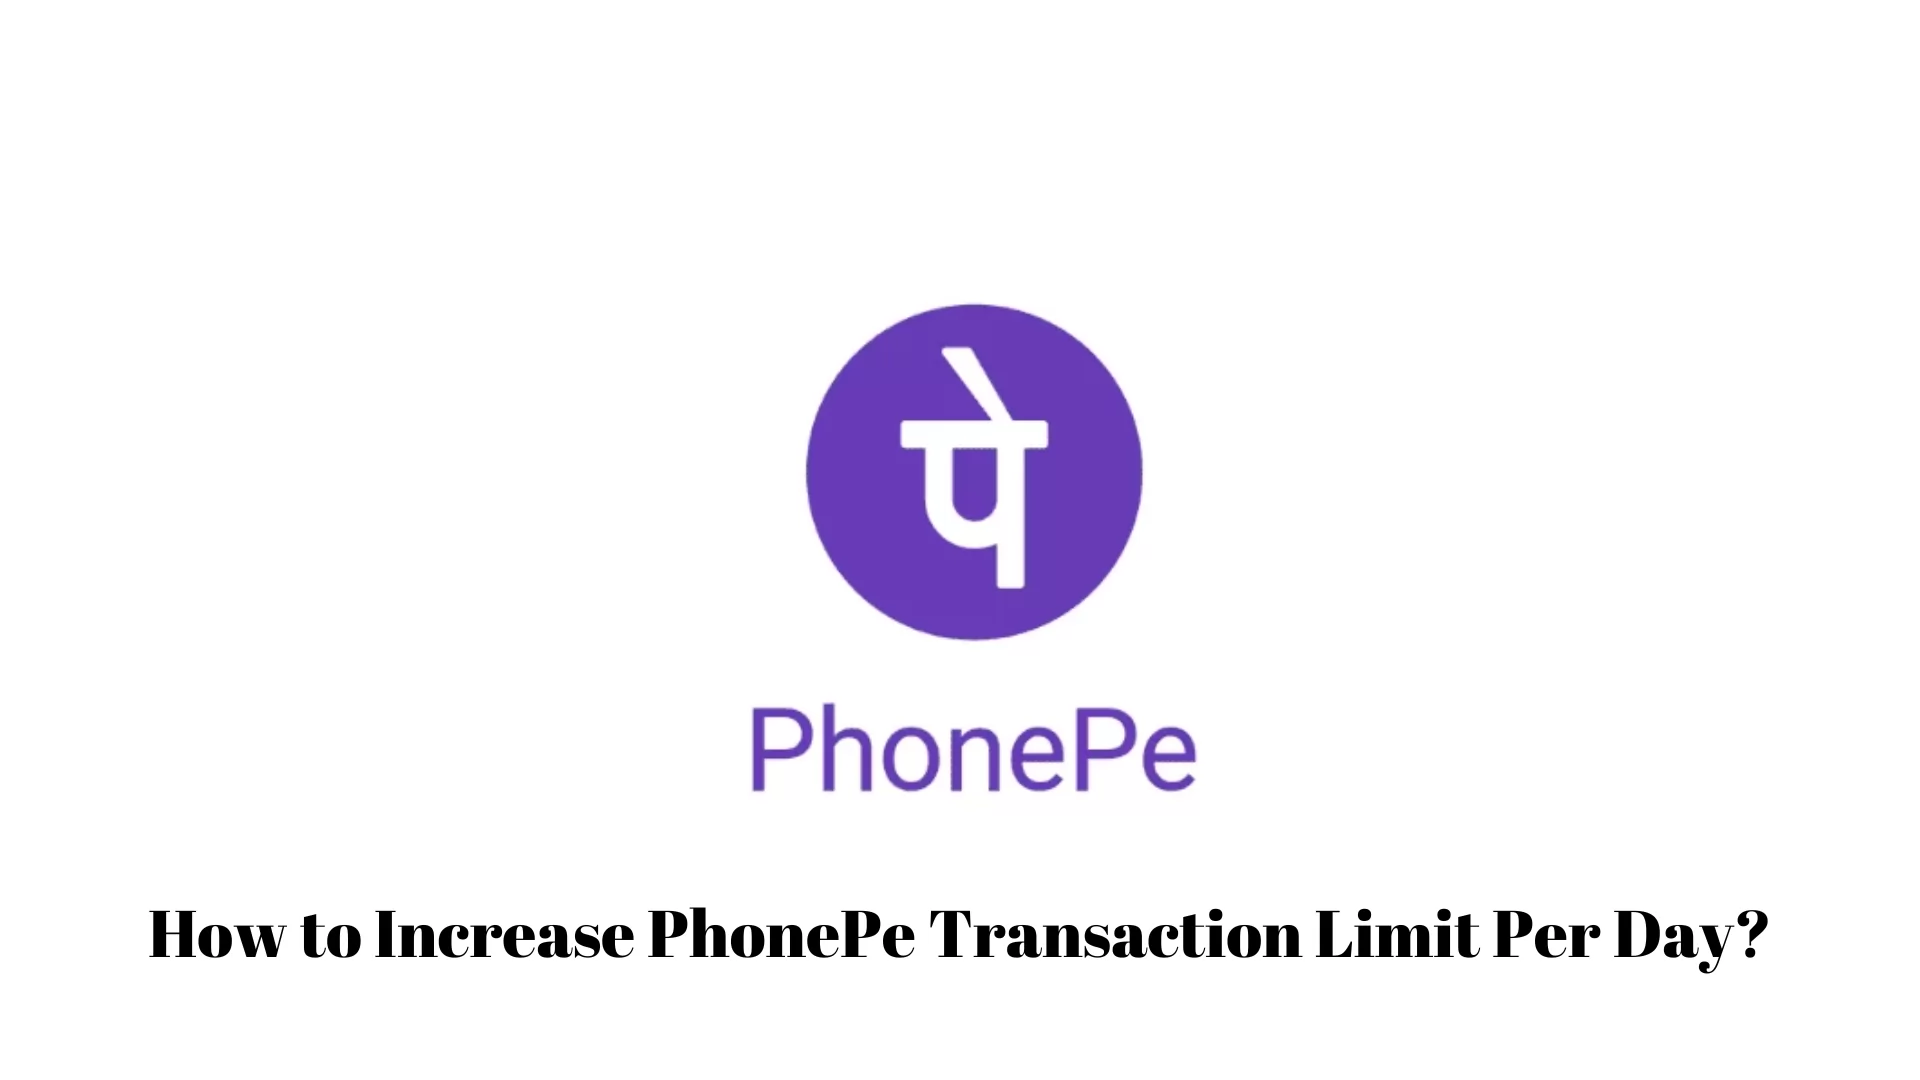 How to Increase PhonePe Transaction Limit Per Day?